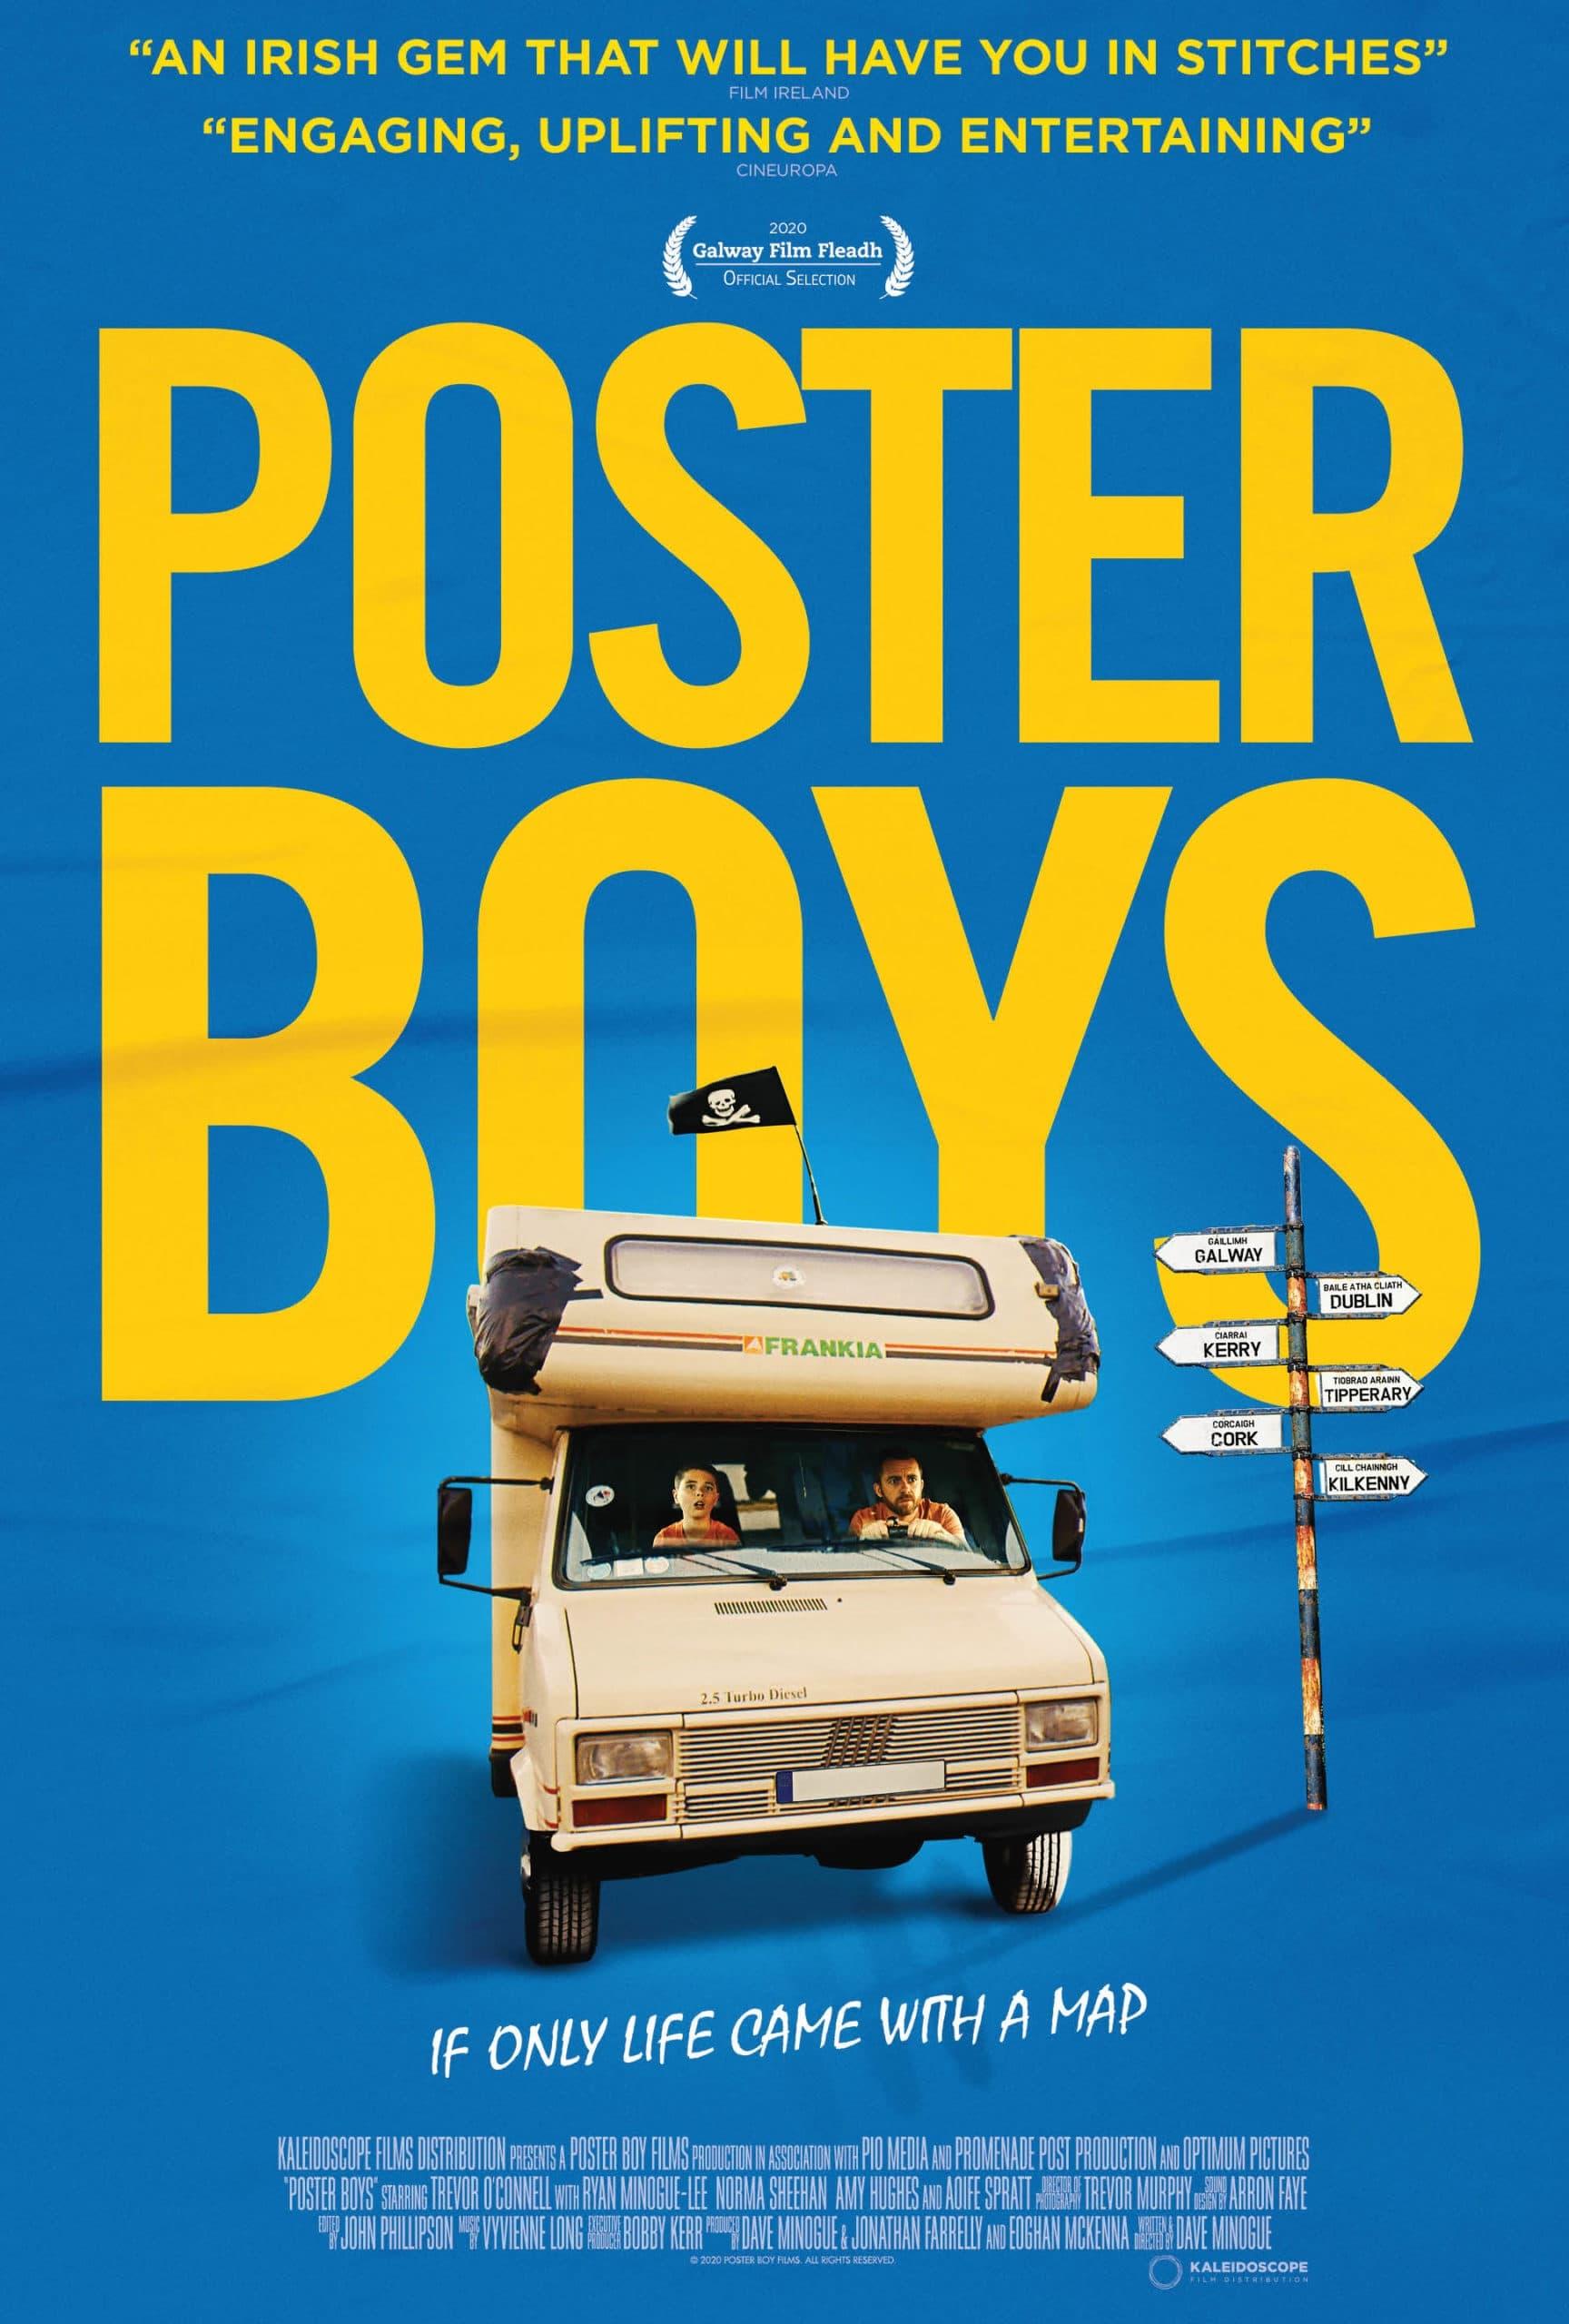 Poster Boys poster